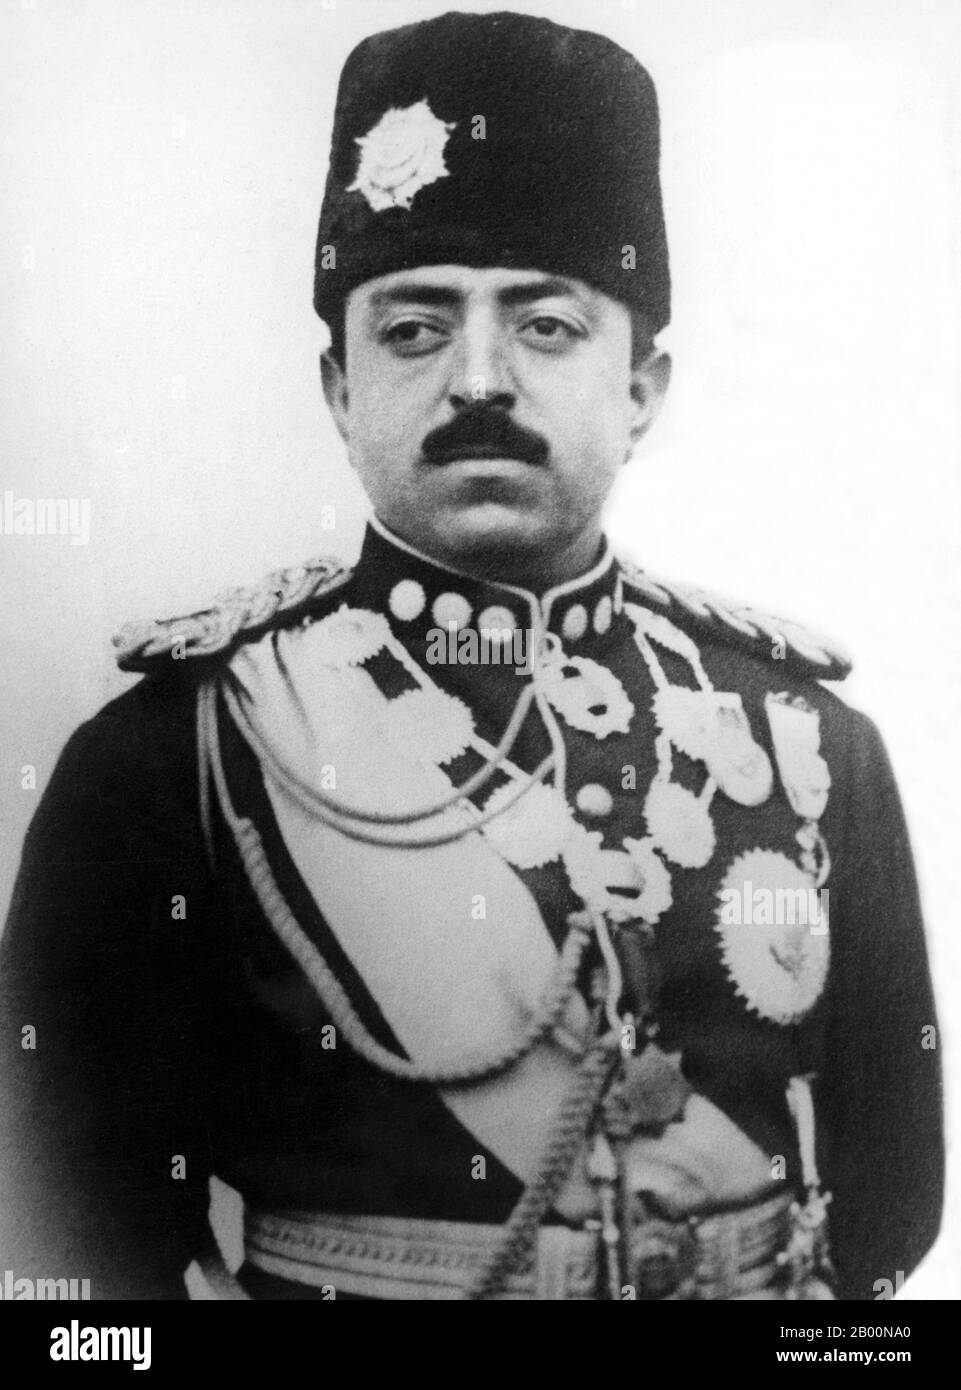 Afghanistan: Amanullah Khan (June 1, 1892 – April 25, 1960), ruler of the Emirate of Afghanistan from 1919 to 1929, first as Amir and after 1926 as Shah.  He led Afghanistan to independence over its foreign affairs from the United Kingdom, and his rule was marked by dramatic political and social change. Stock Photo